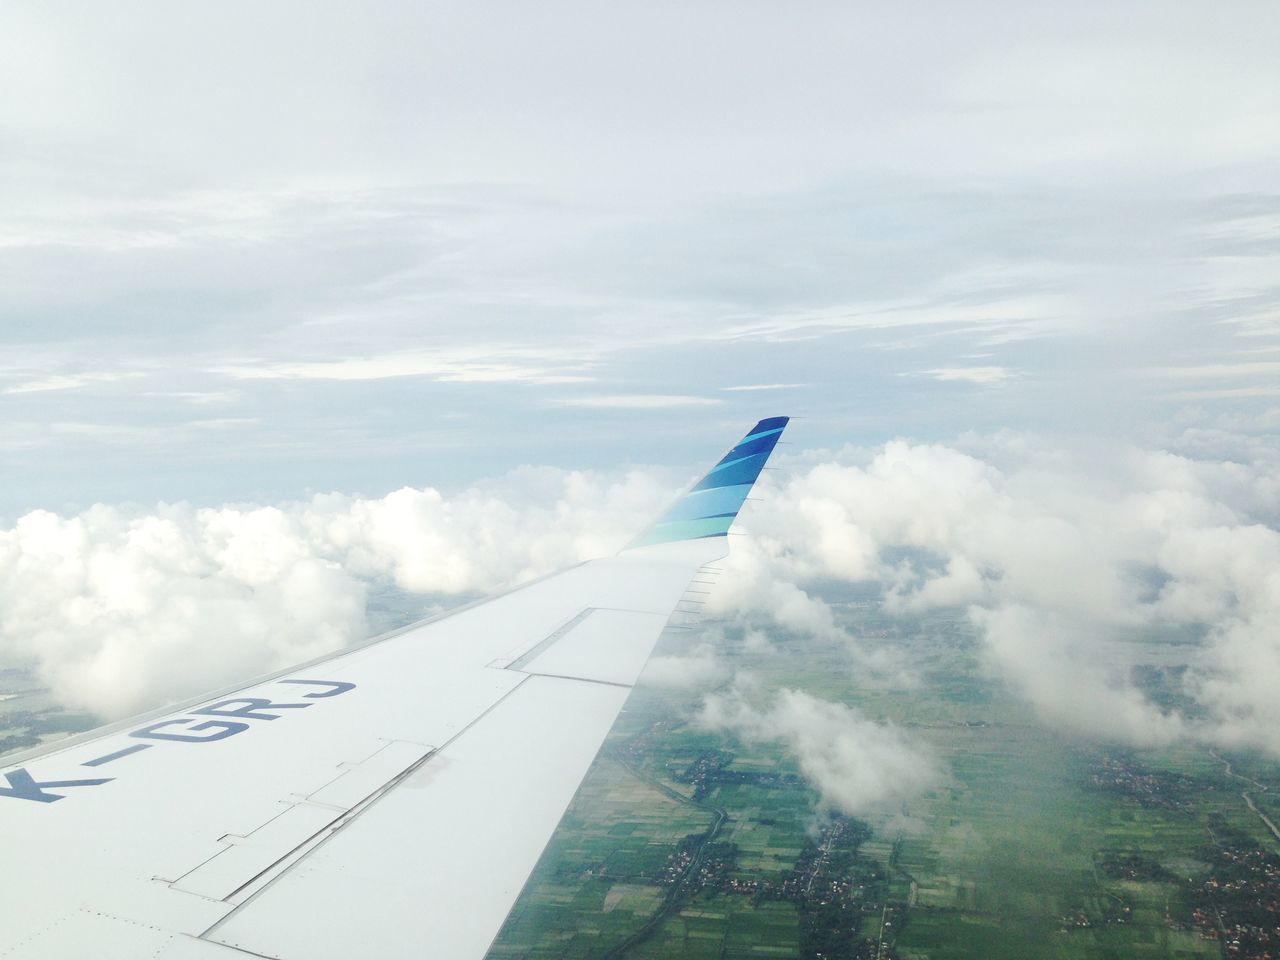 AERIAL VIEW OF AIRCRAFT WING AGAINST SKY